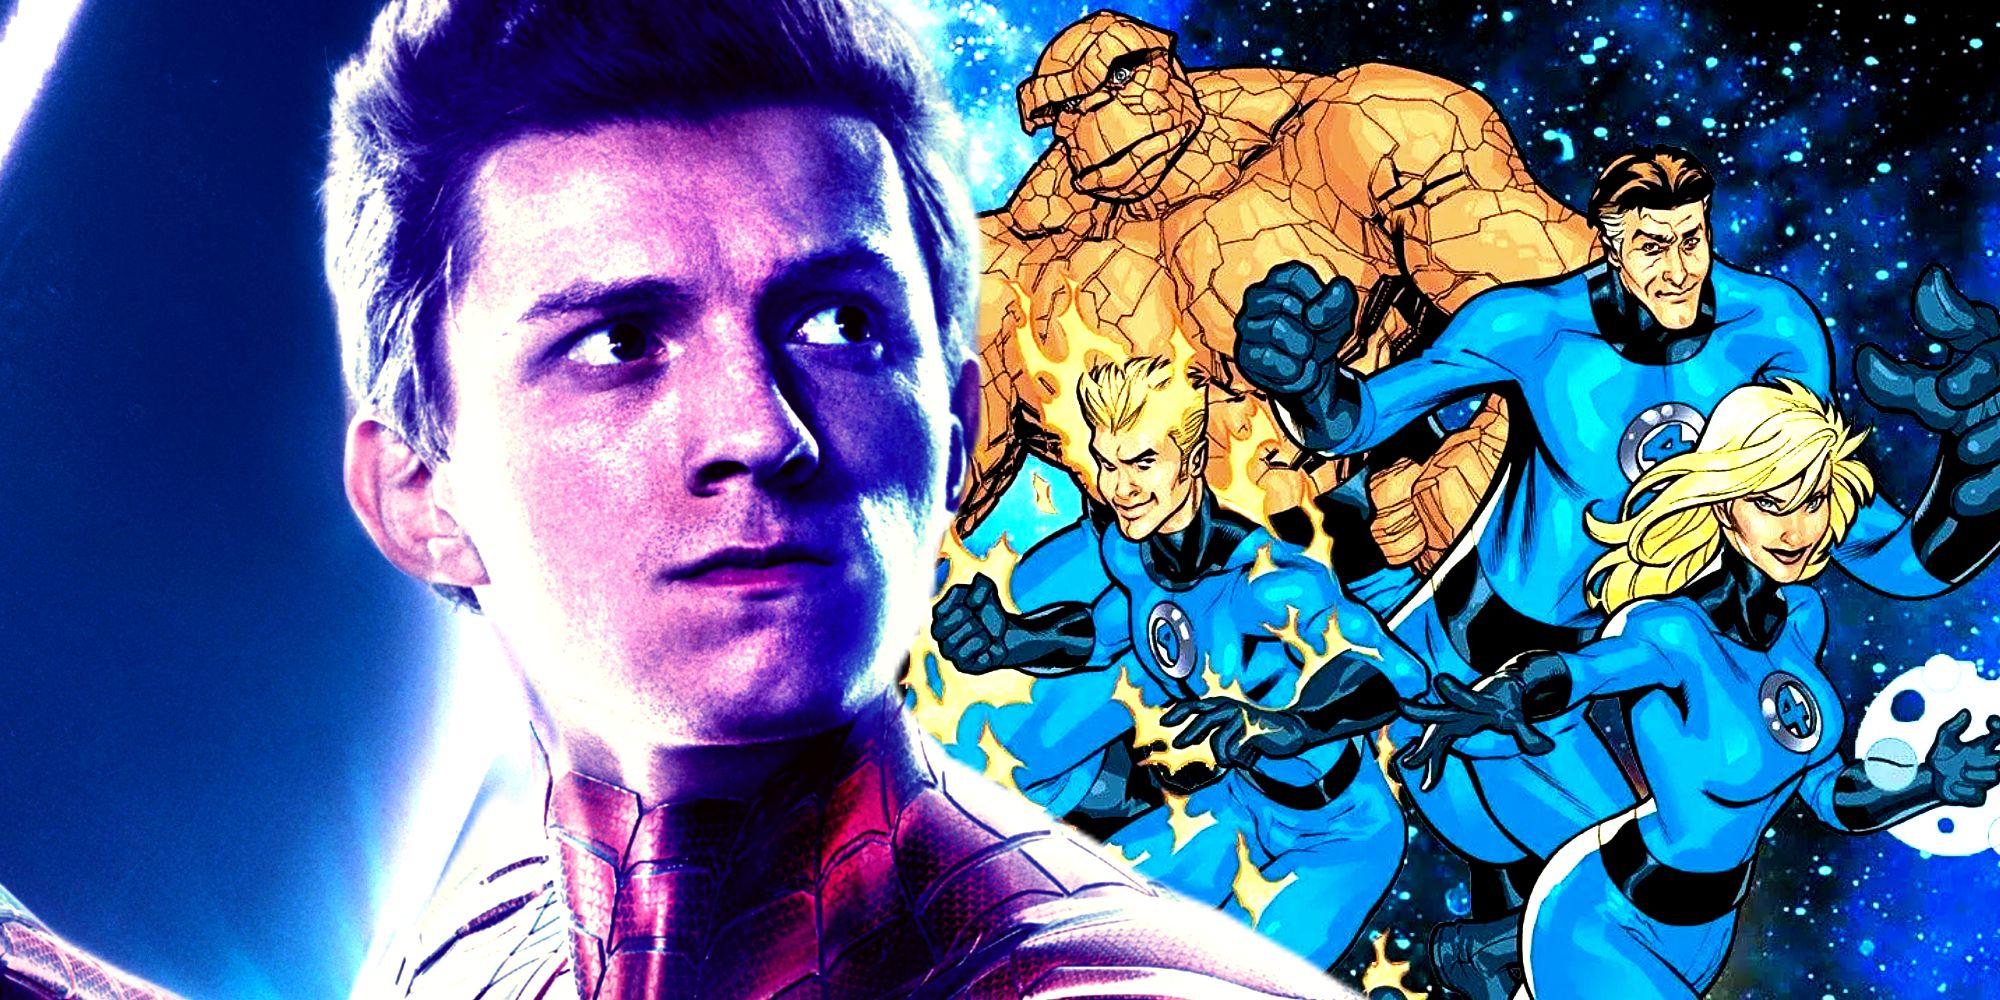 Tom Holland's Spider-Man in Avengers Endgame and the Fantastic Four in Marvel Comics